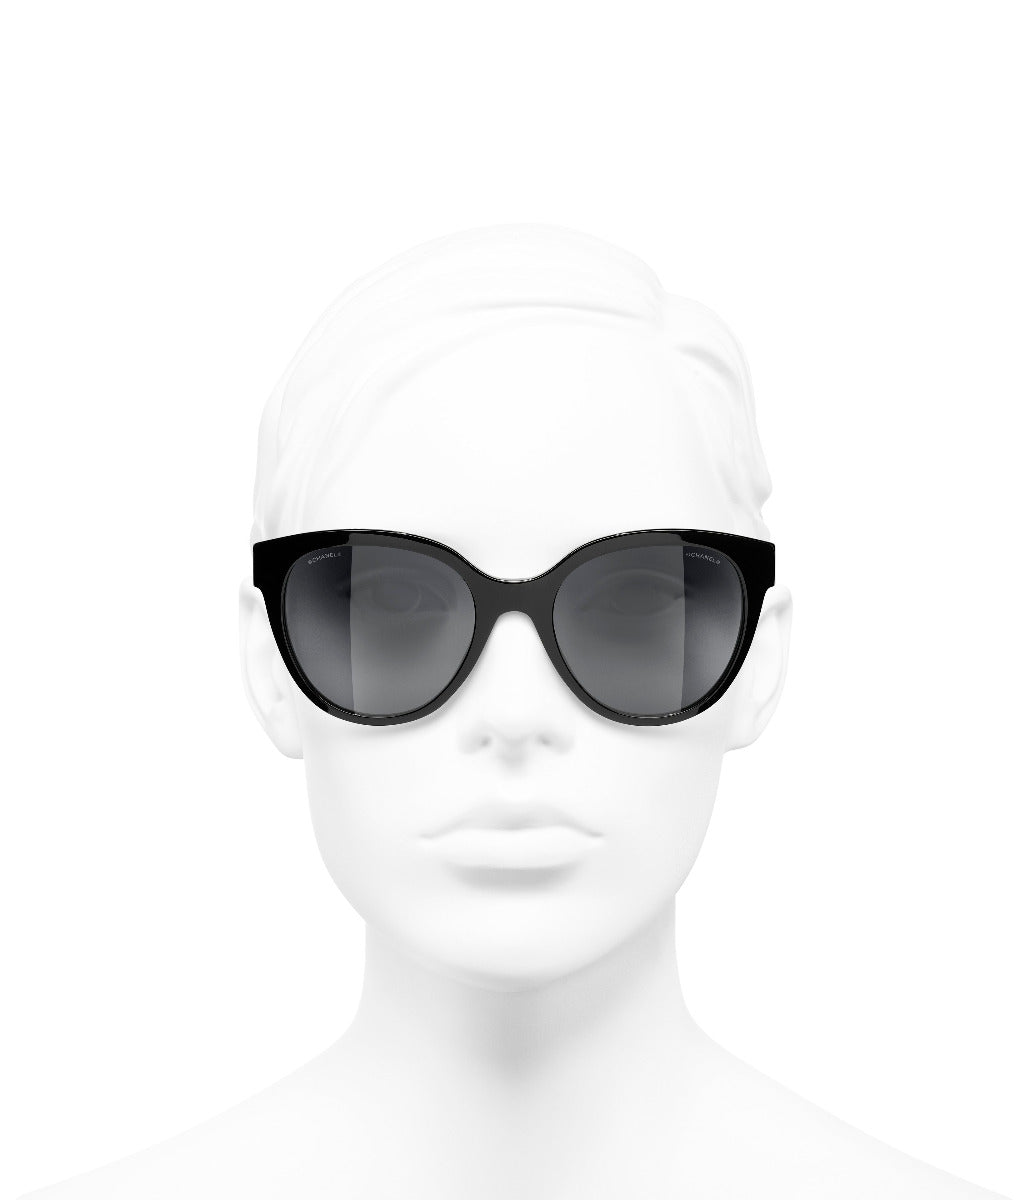 CHANEL Acetate Butterfly Sunglasses 5371 Black